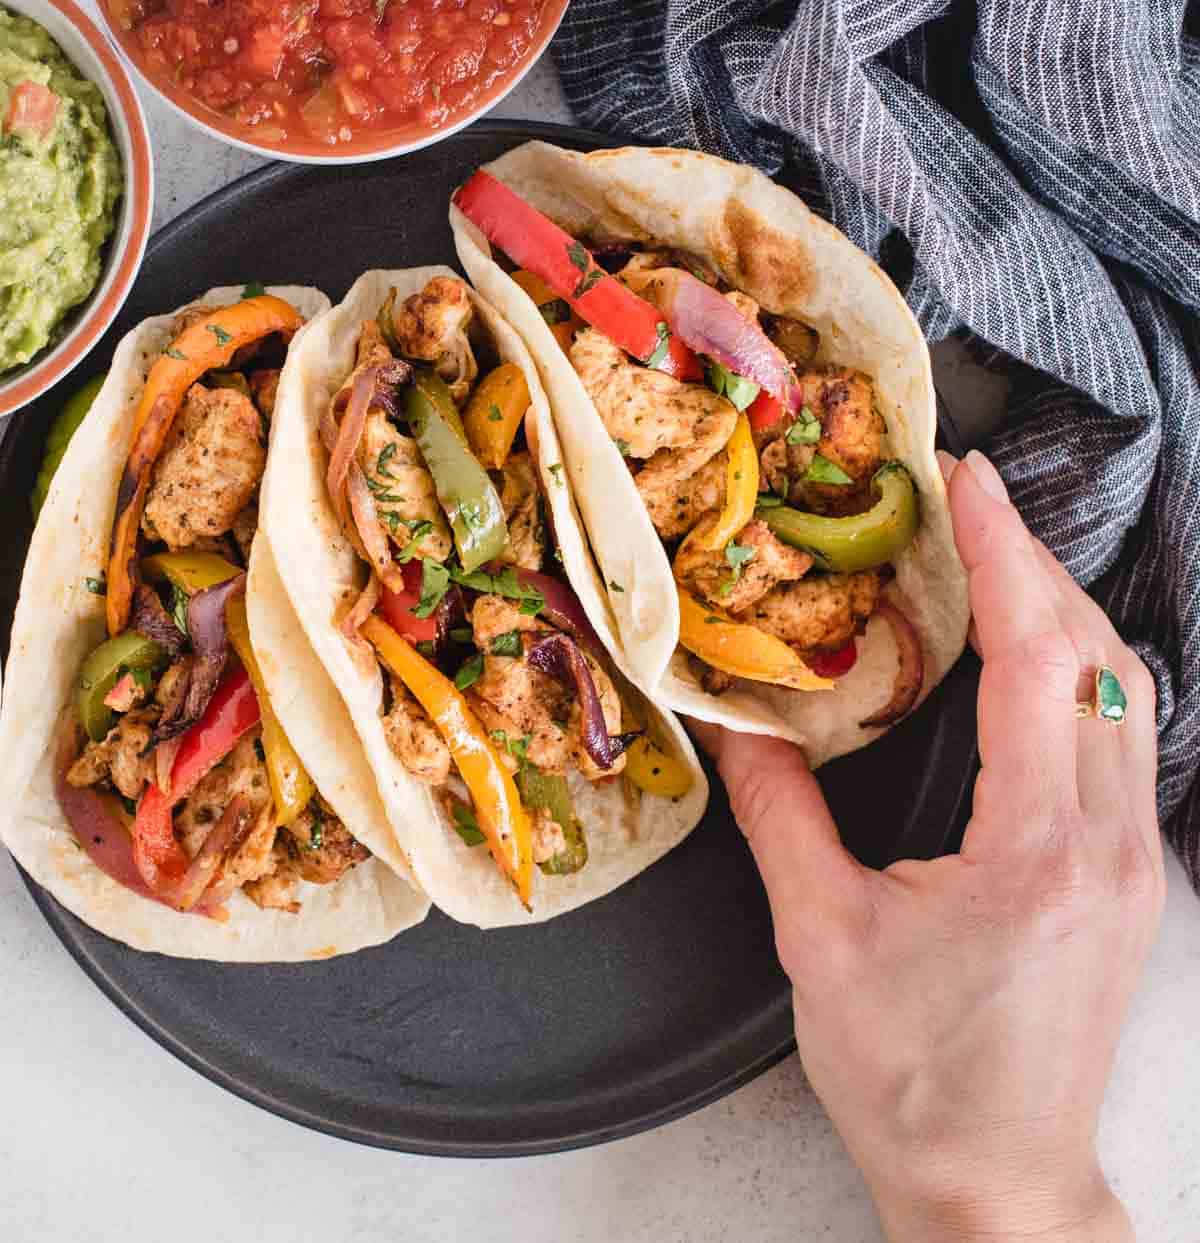 plate with 3 chicken fajitas on it with a hand grabbing one of them